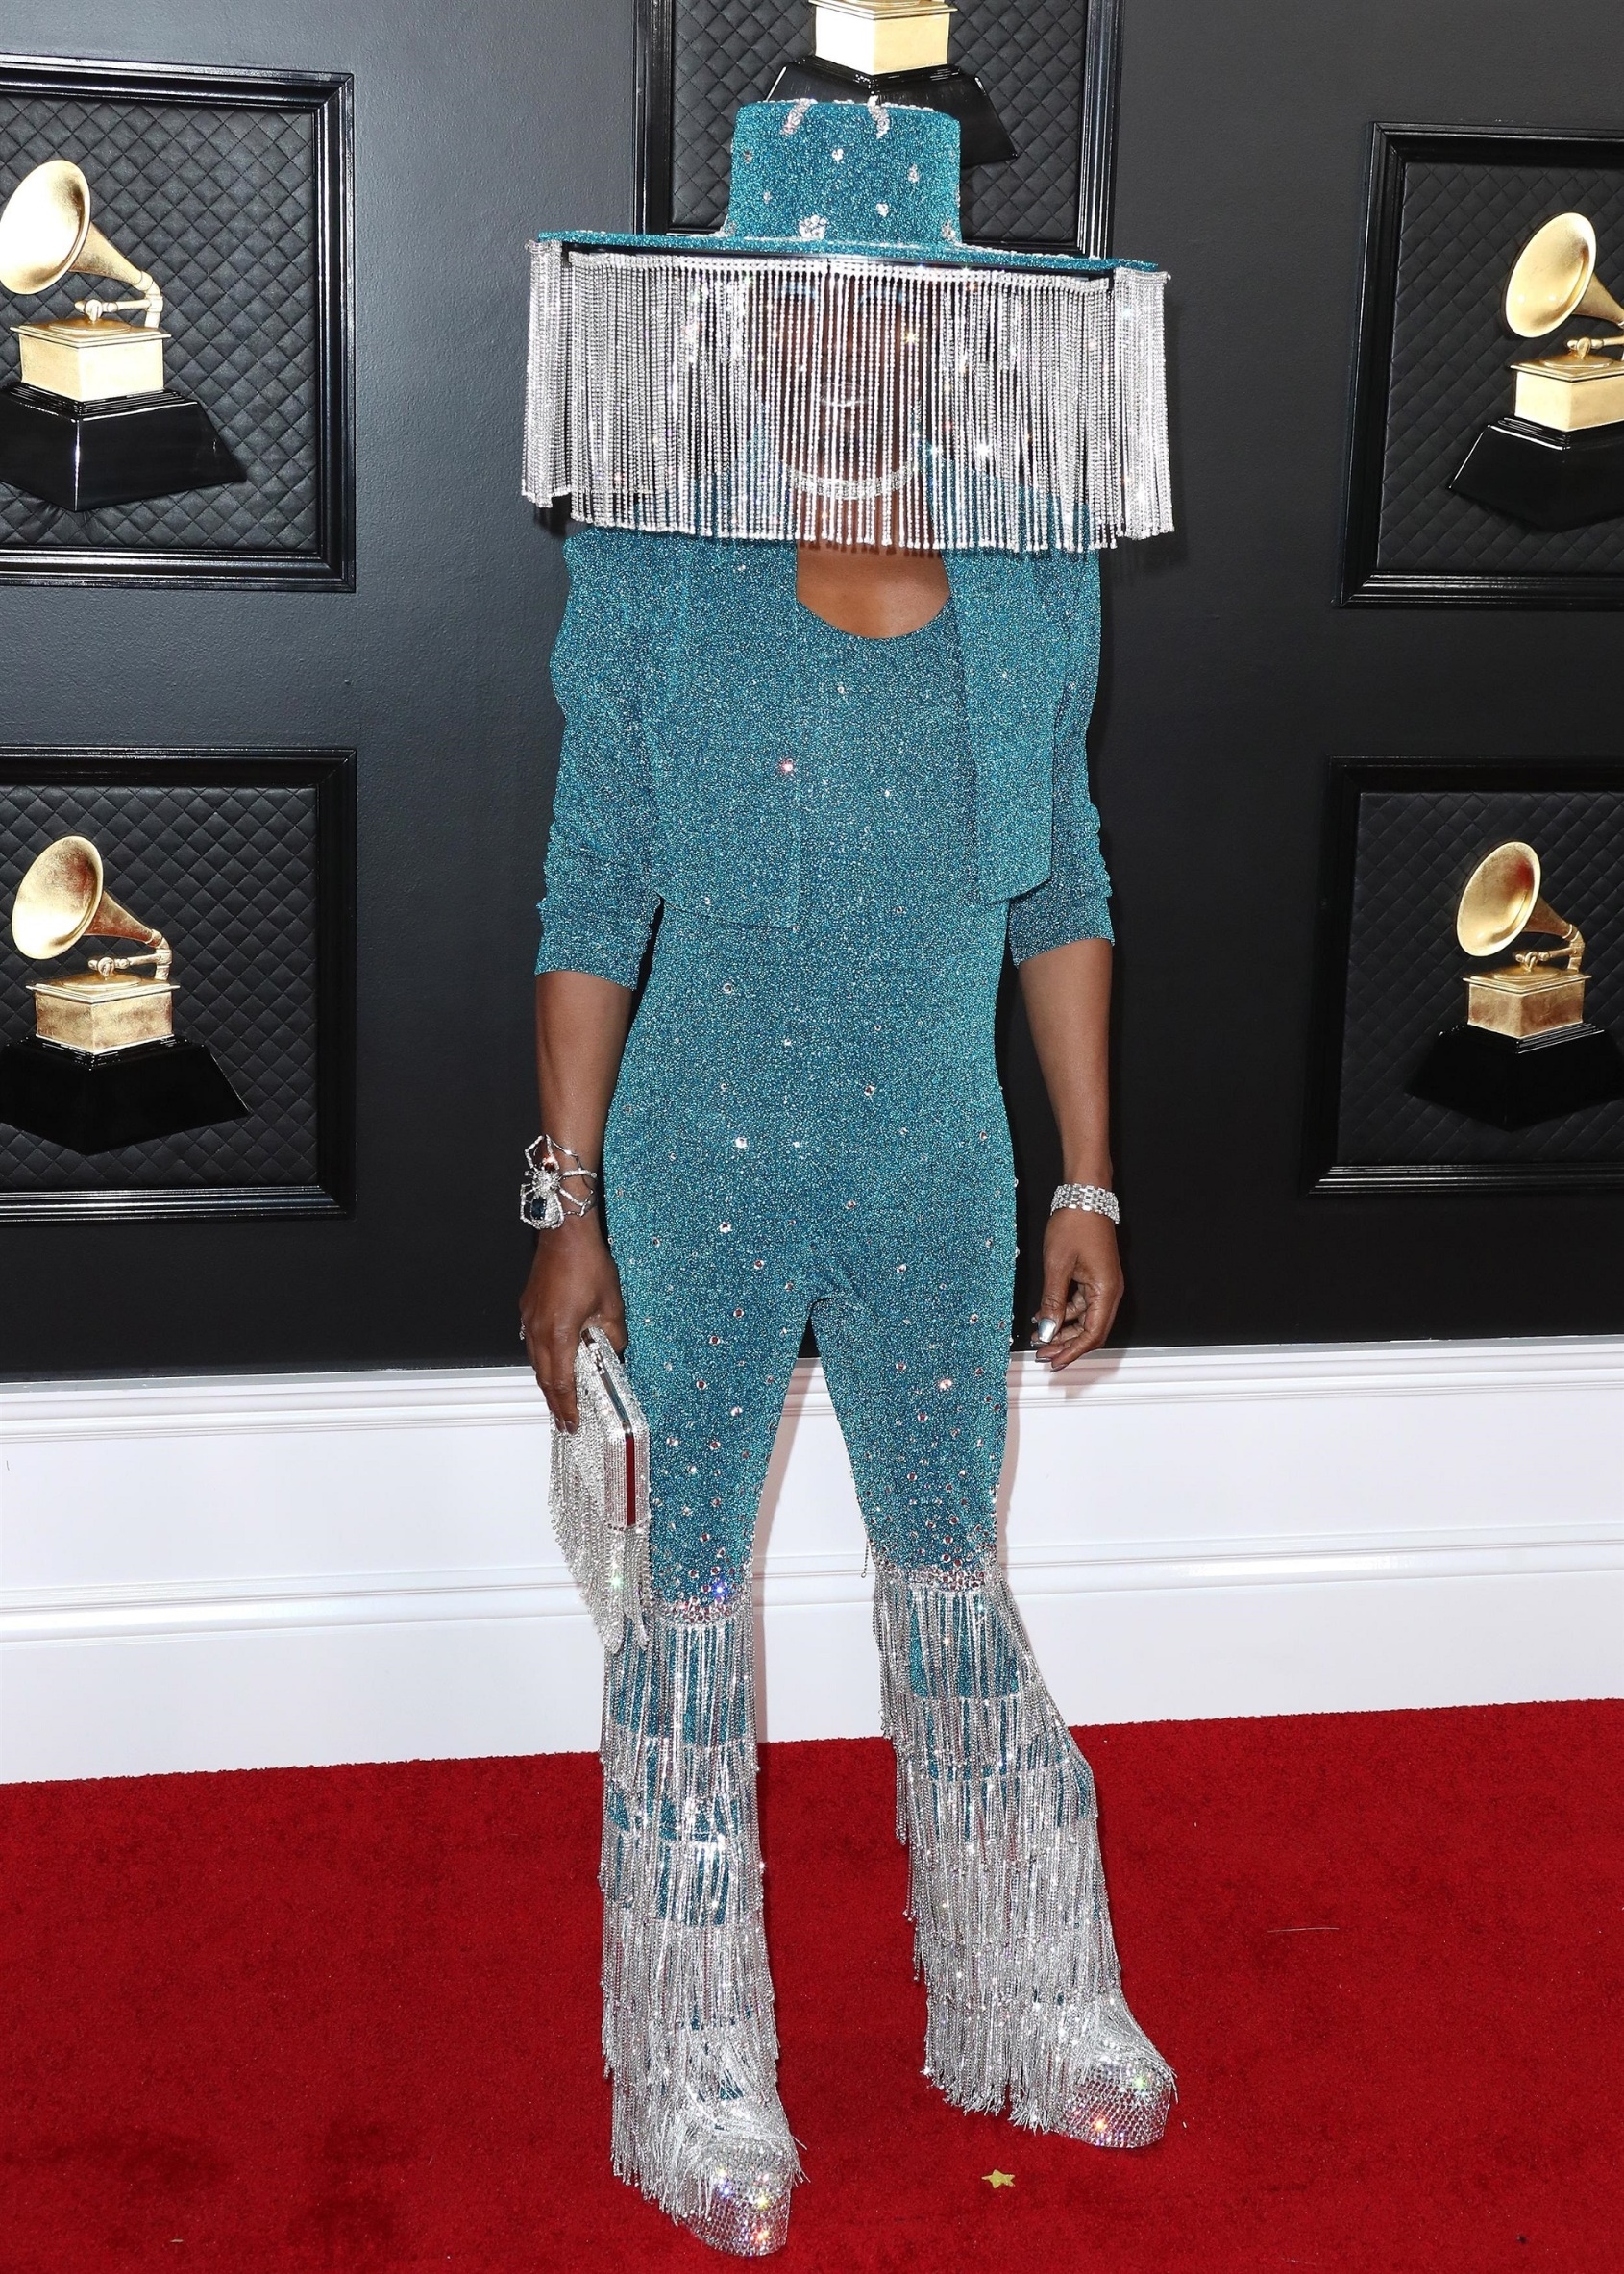 Los Angeles, CA  - 62nd Annual GRAMMY Awards held at Staples Center on January 26, 2020 in Los Angeles, California.

BACKGRID USA 26 JANUARY 2020, Image: 495004553, License: Rights-managed, Restrictions: , Model Release: no, Credit line: Image Press / BACKGRID / Backgrid USA / Profimedia